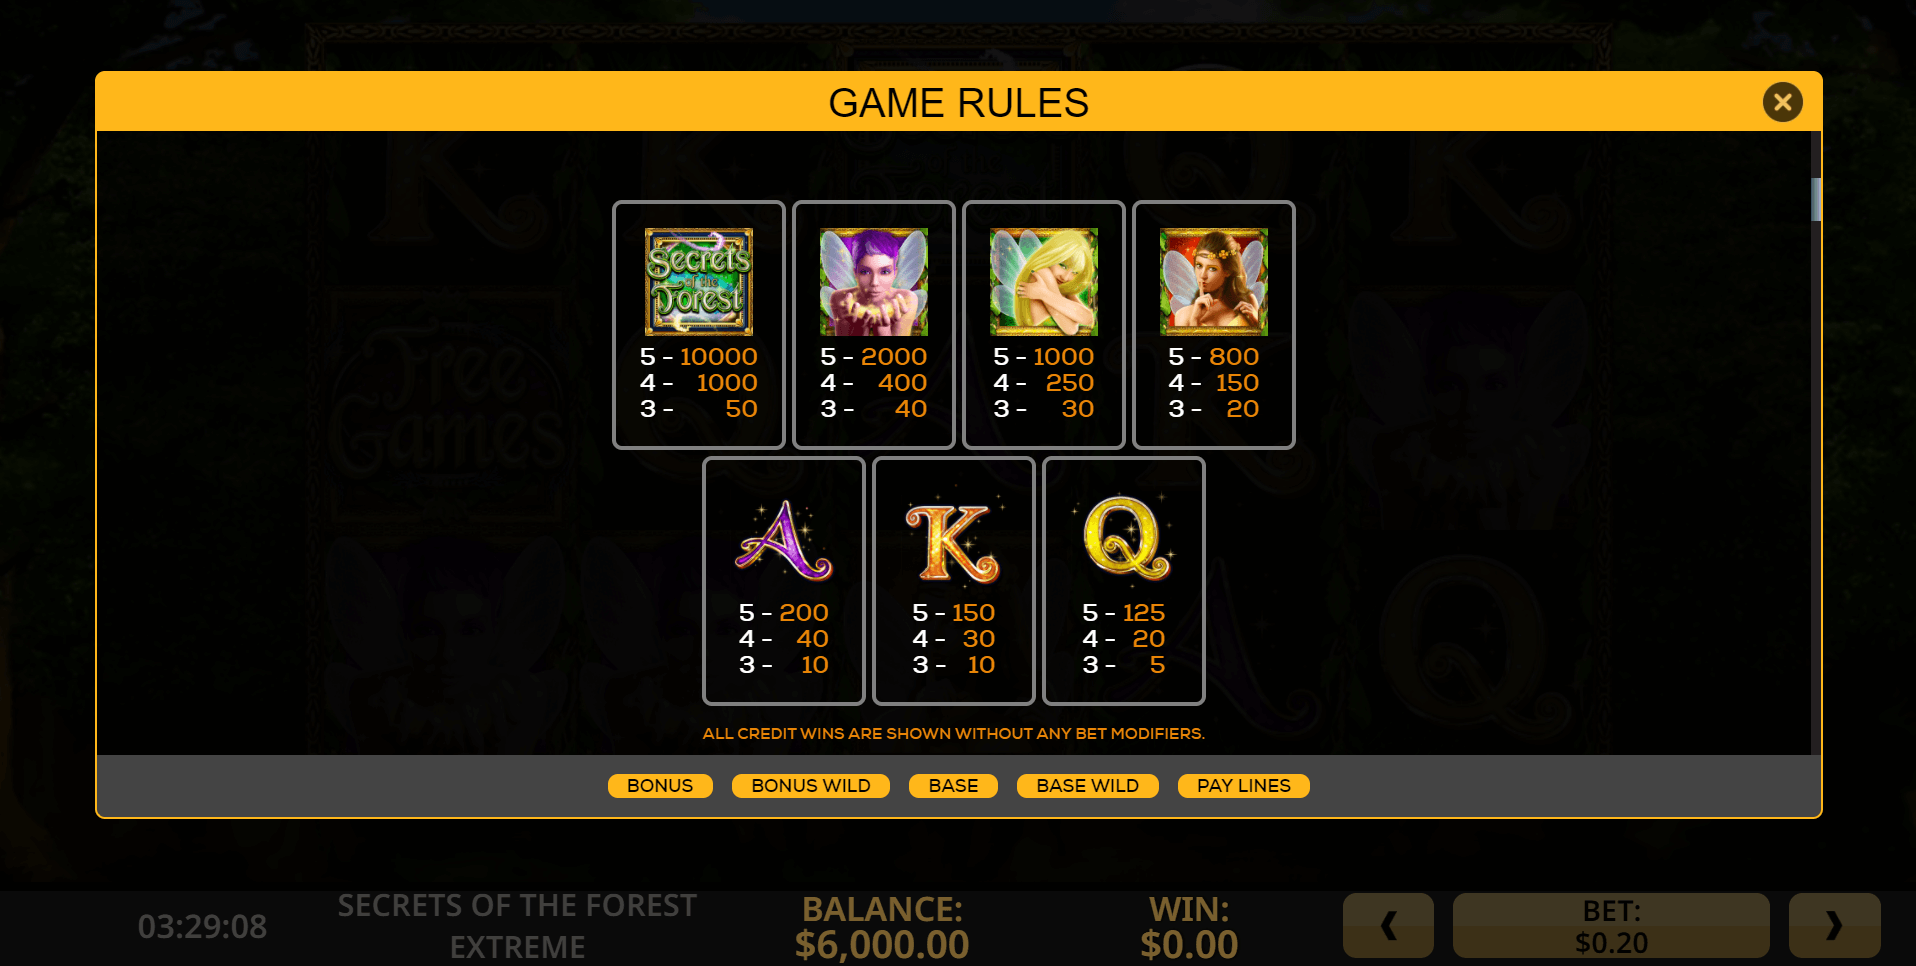 secrets of the forest extreme slot machine detail image 1